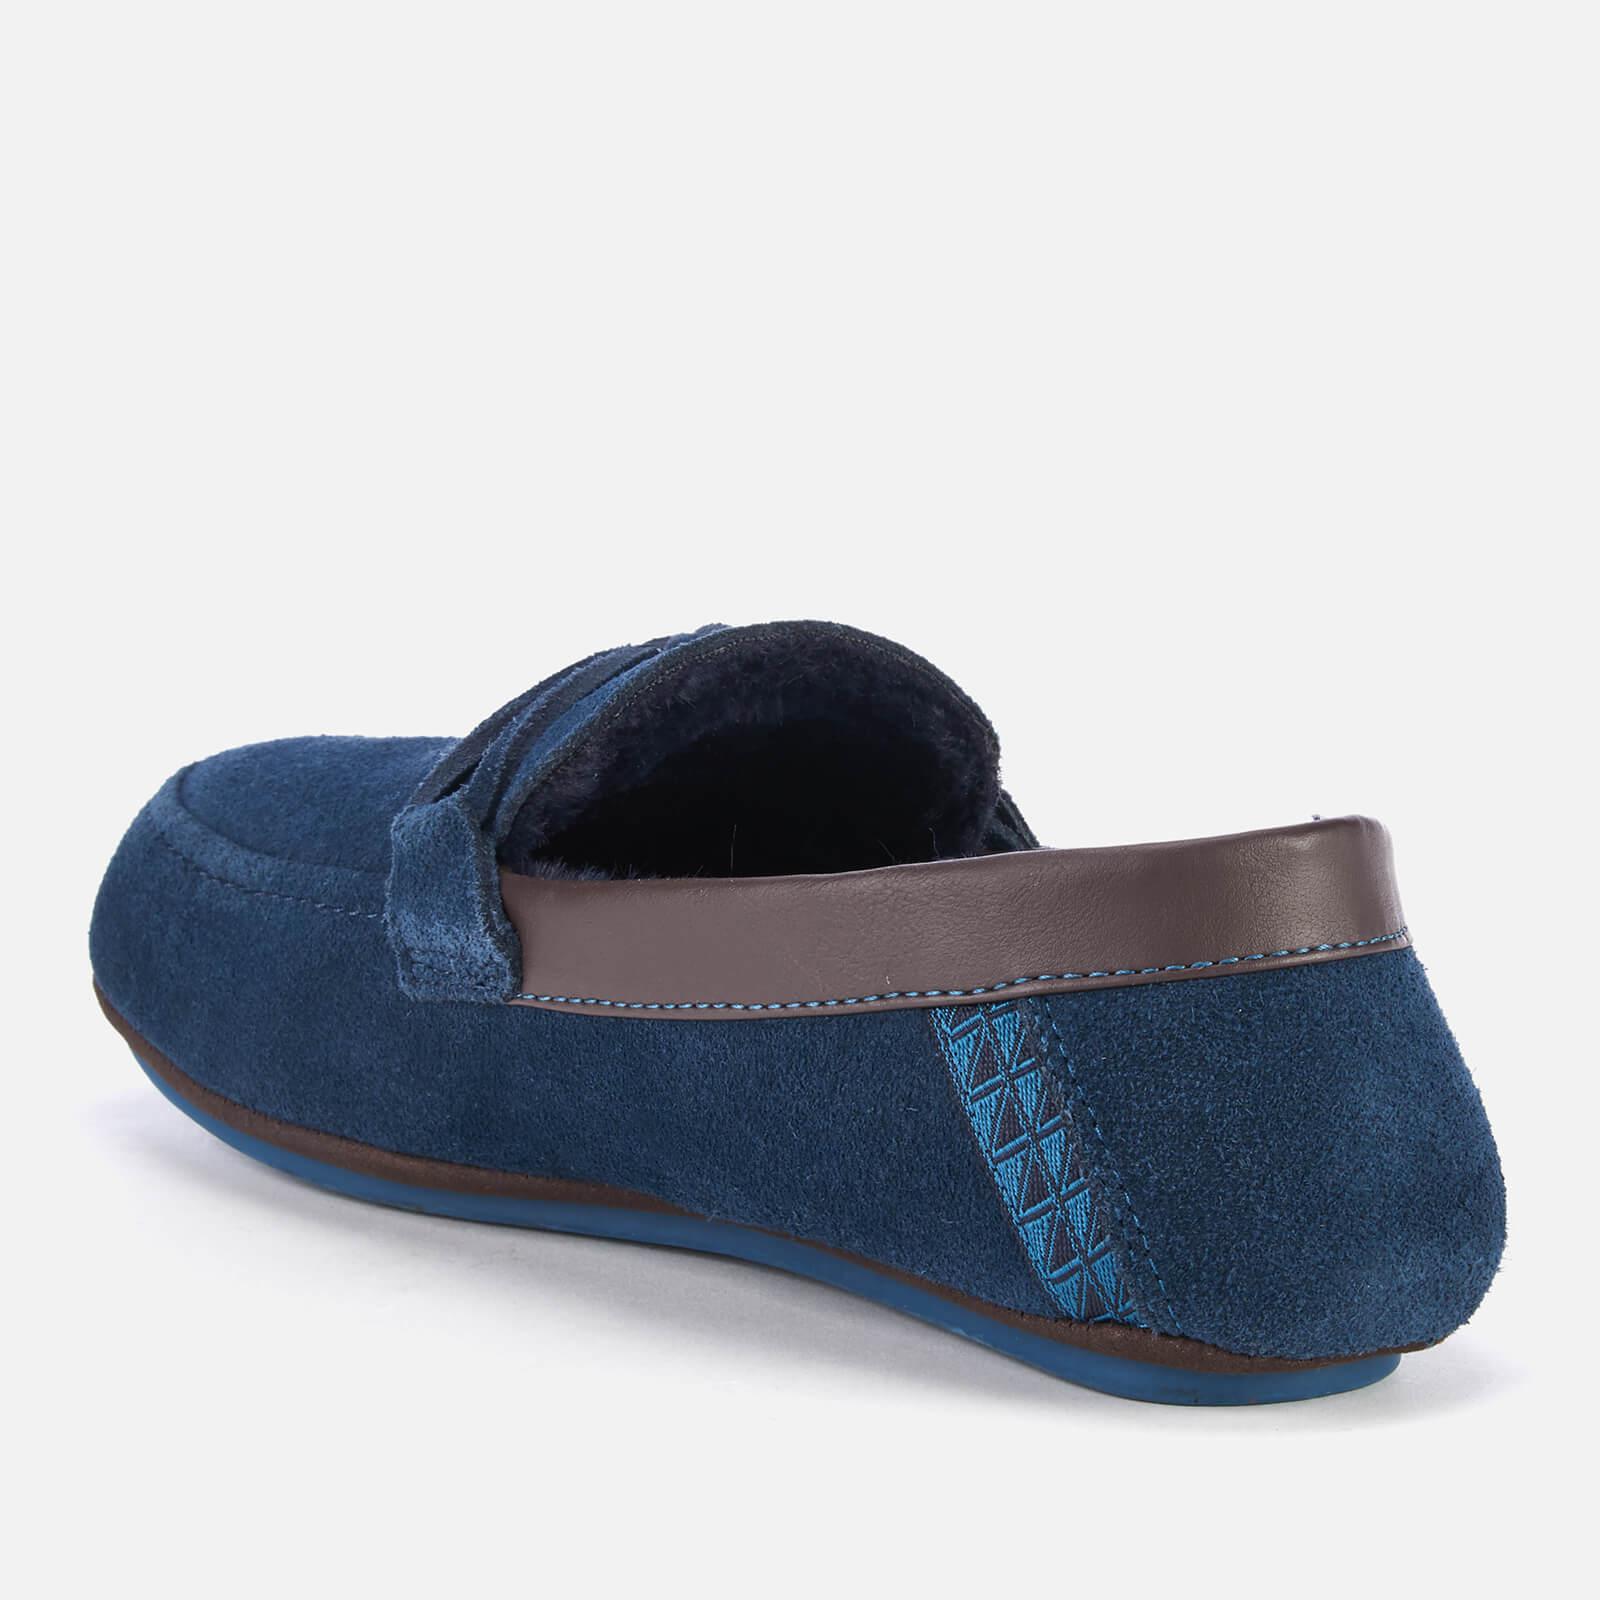 Ted Baker Valcent Suede Moccasin Slippers in Blue for Men - Lyst